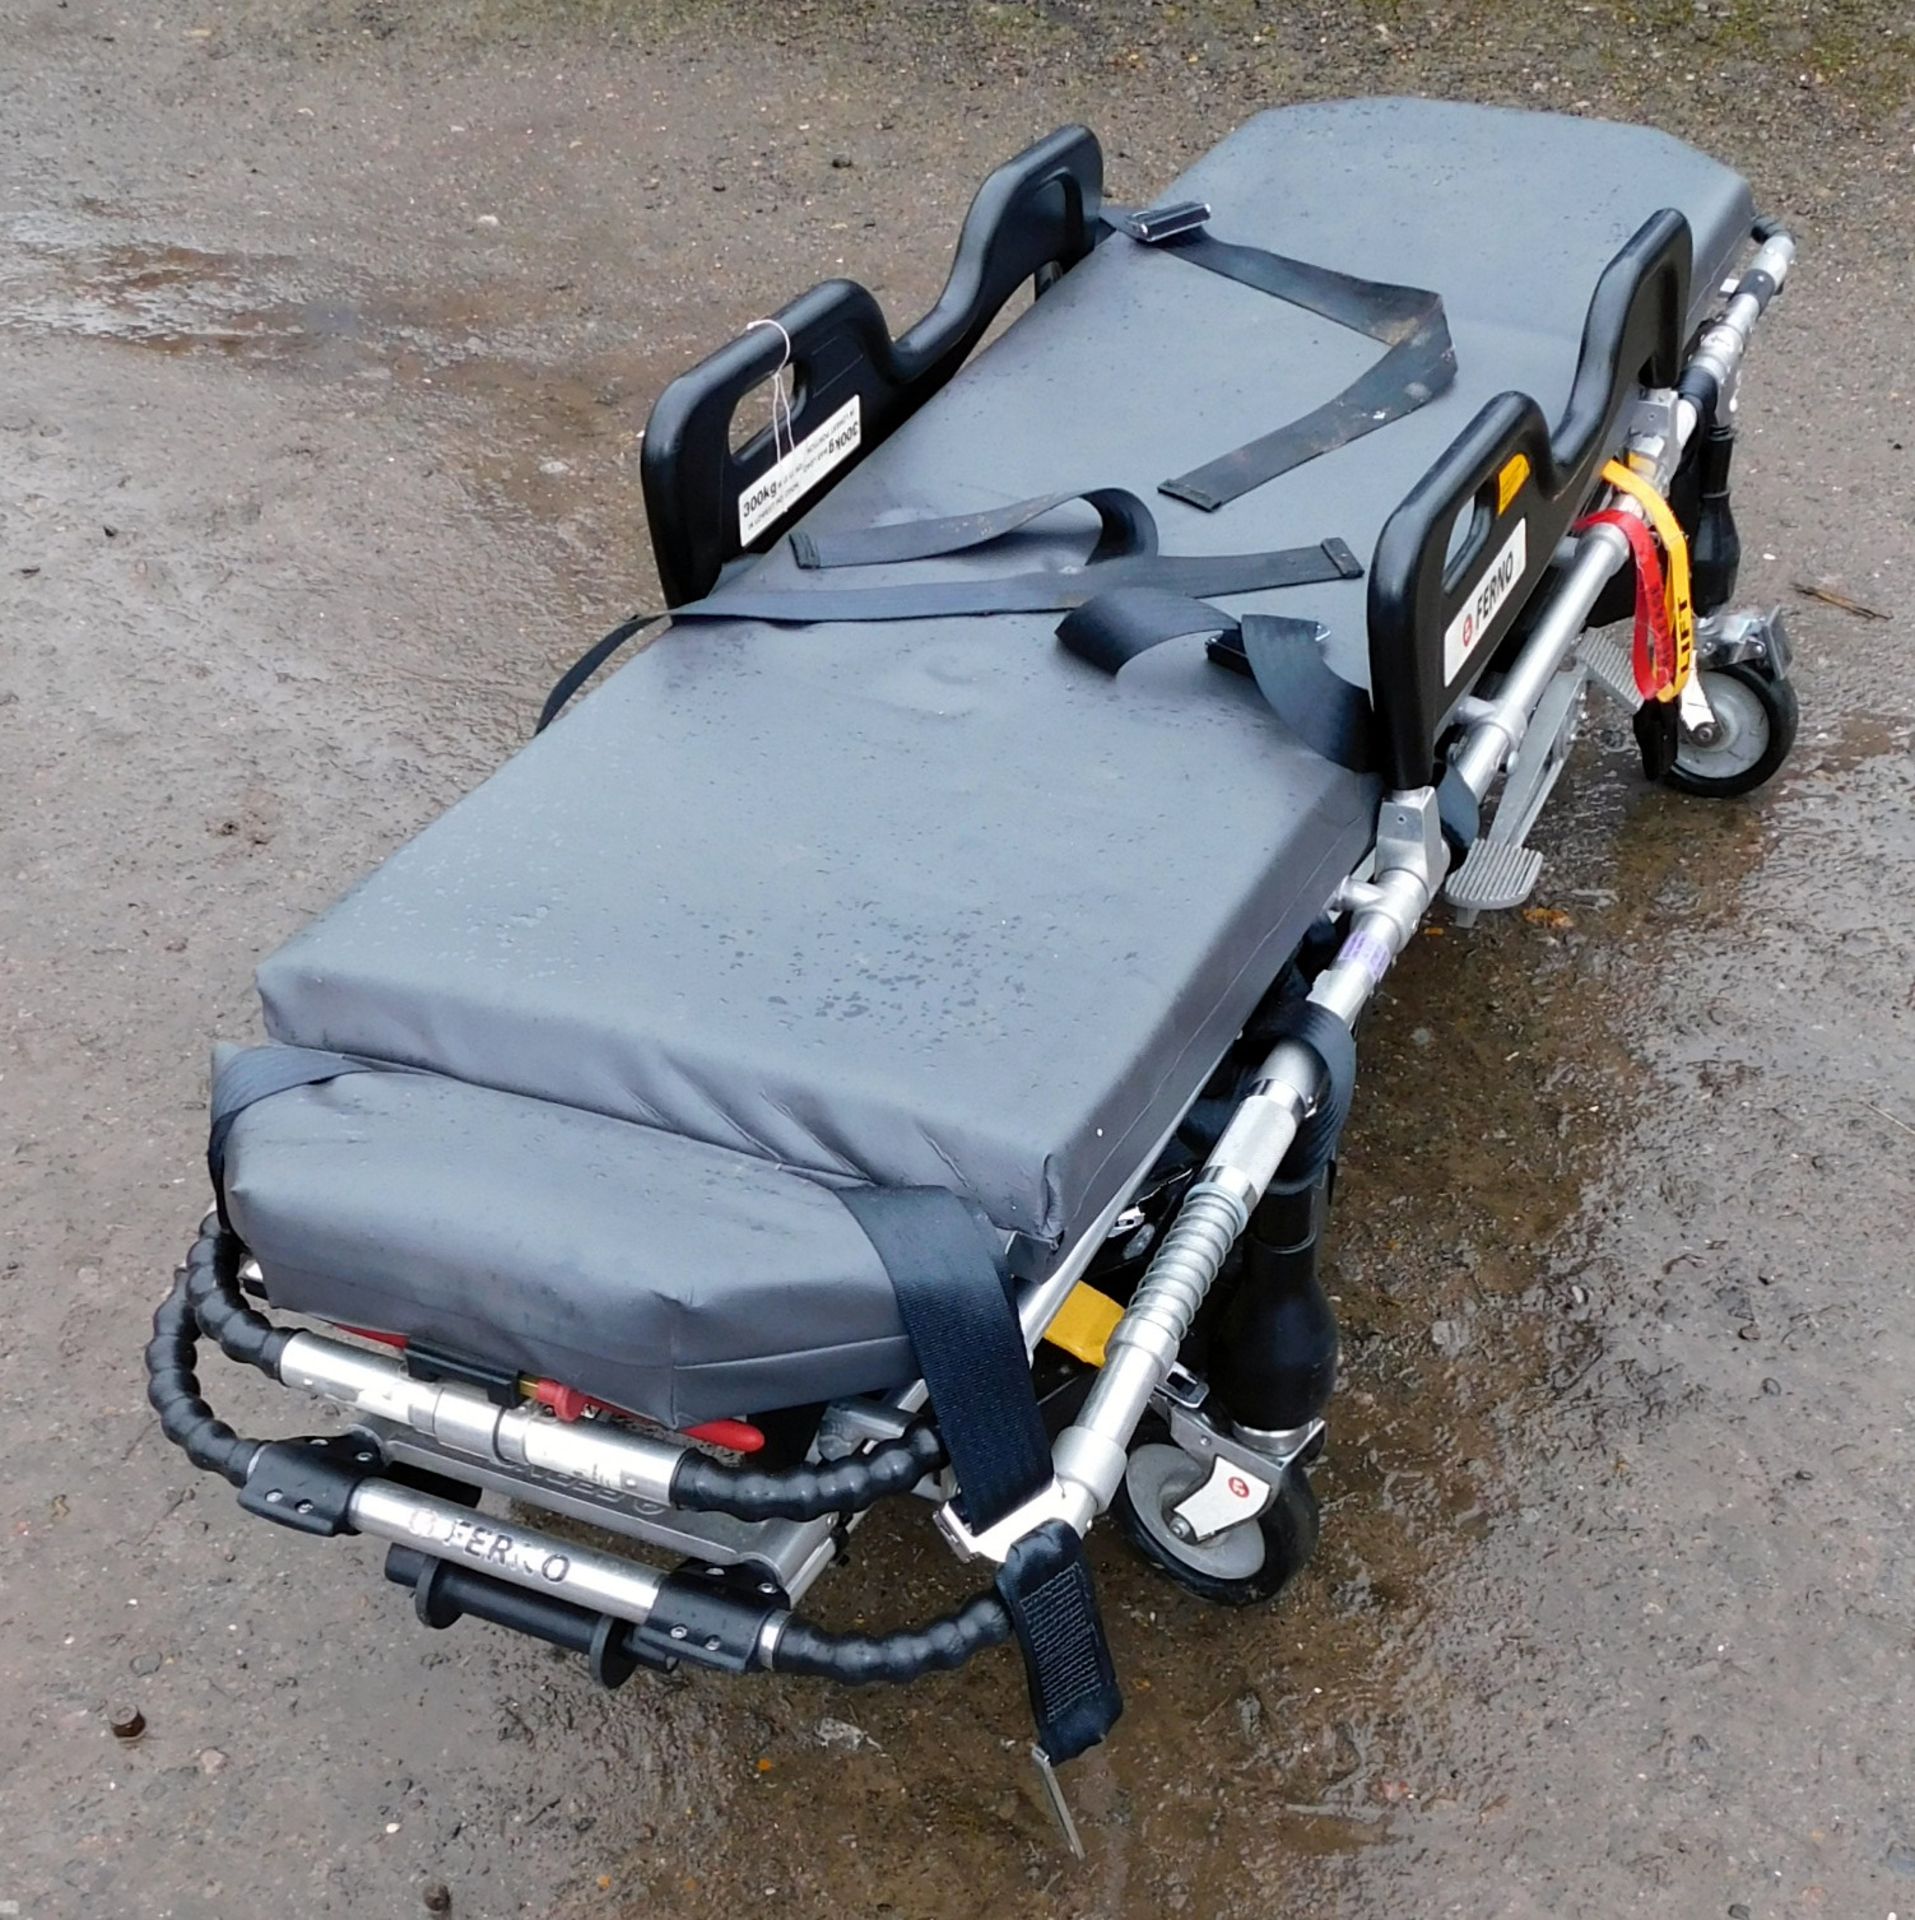 Ferno Pegasus Stretcher s/n PEG 6200 (2014), Lift Count 1837 (Stored on Lot 27) (Located South - Image 2 of 5